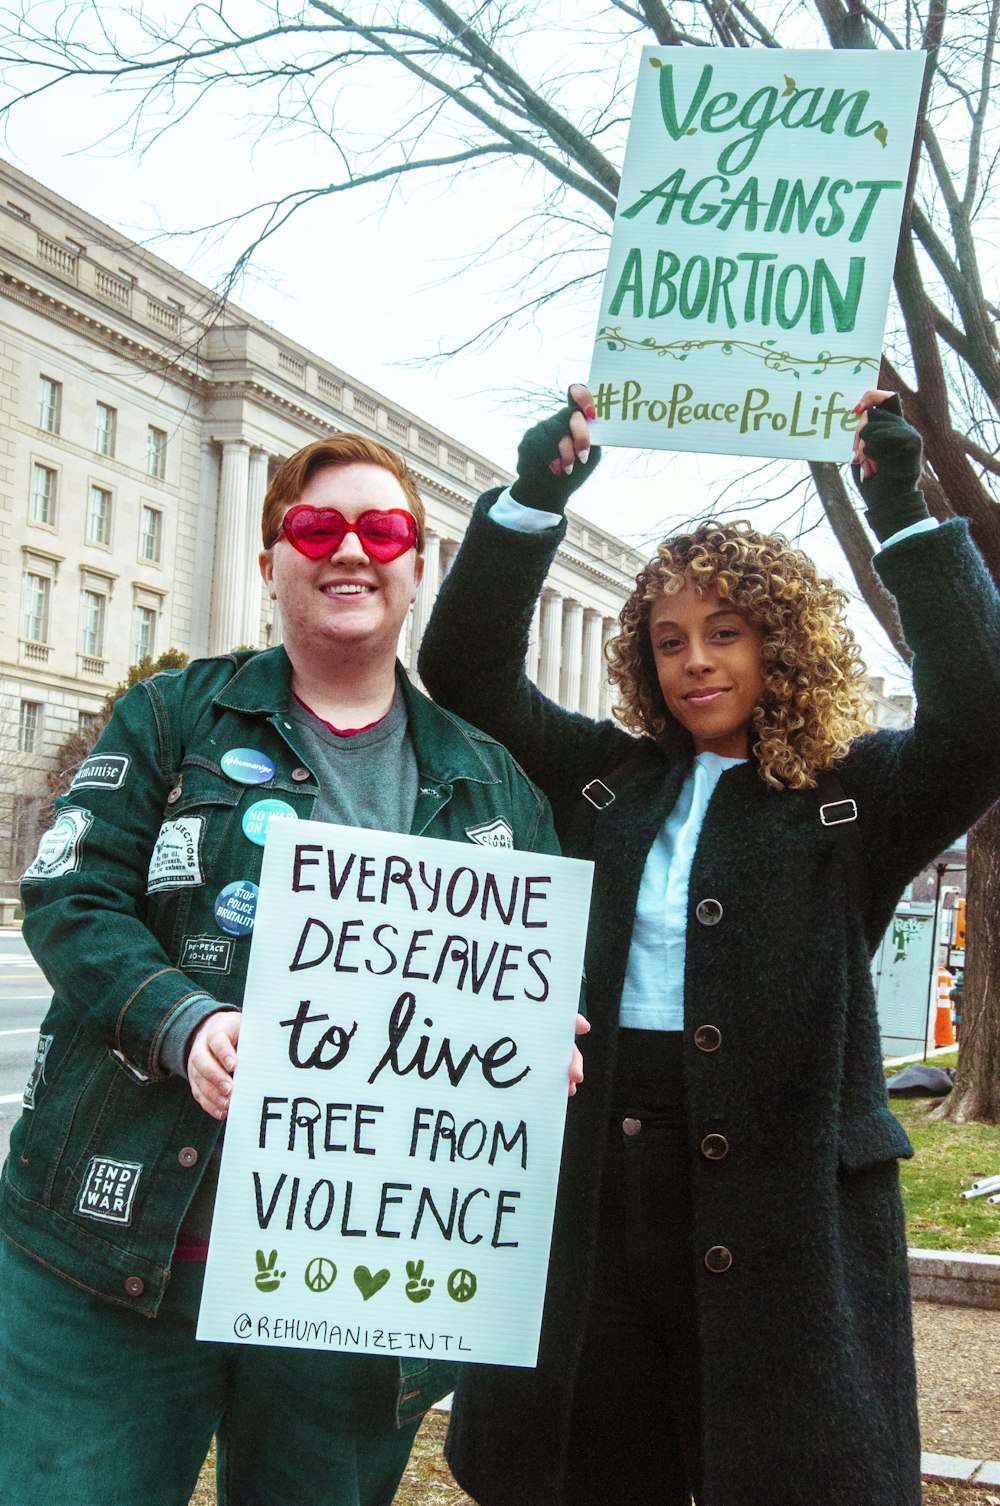 A pro-life on the left holding a sign that says: "Everyone deserves to live free from violence." And another woman holding up a sign "Vegan against abortion #ProPeaceProLife"